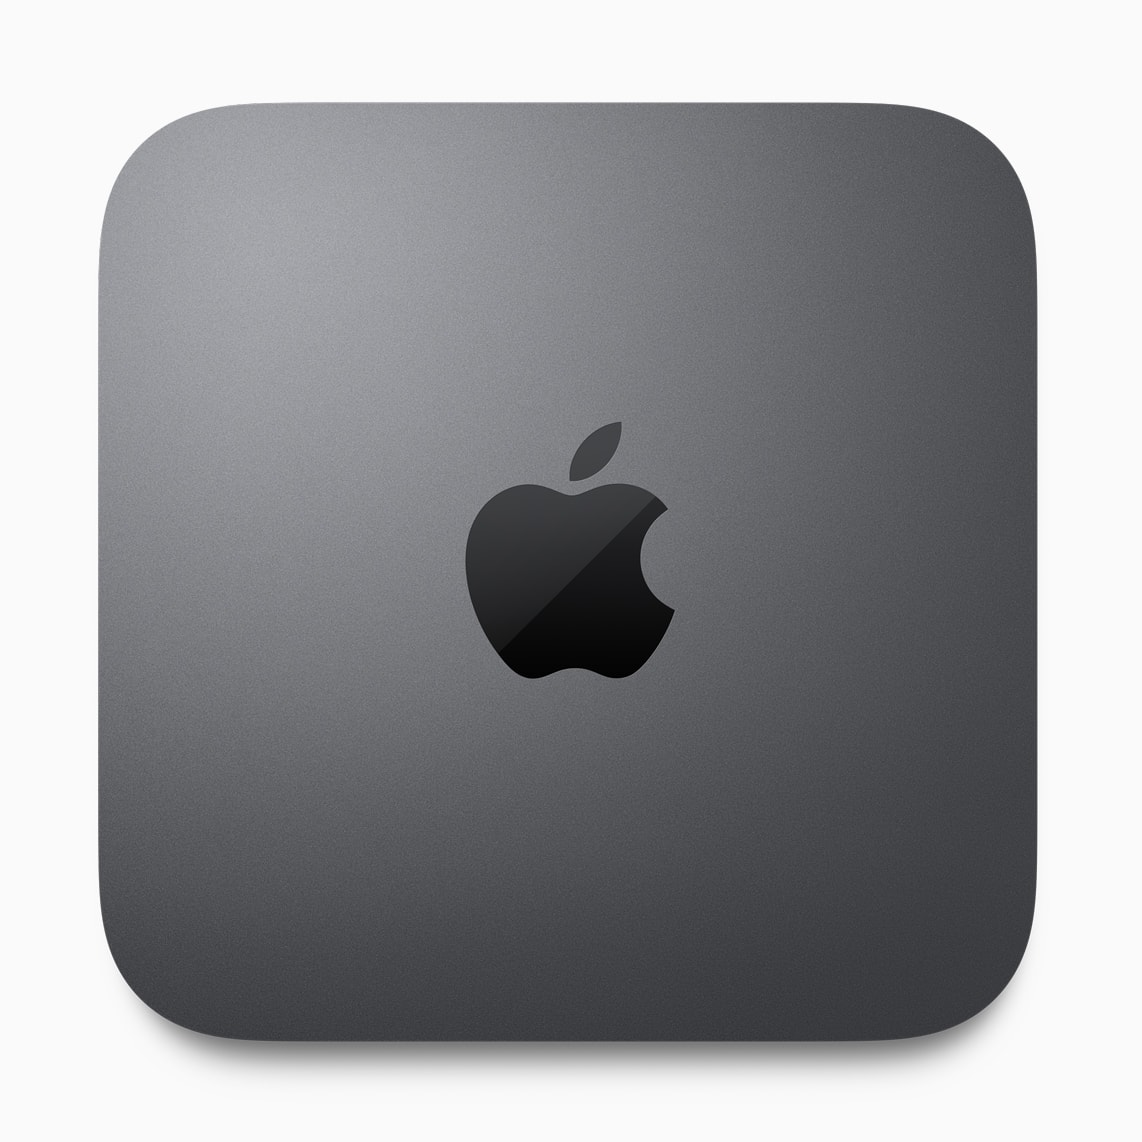 New Mac mini viewed from above